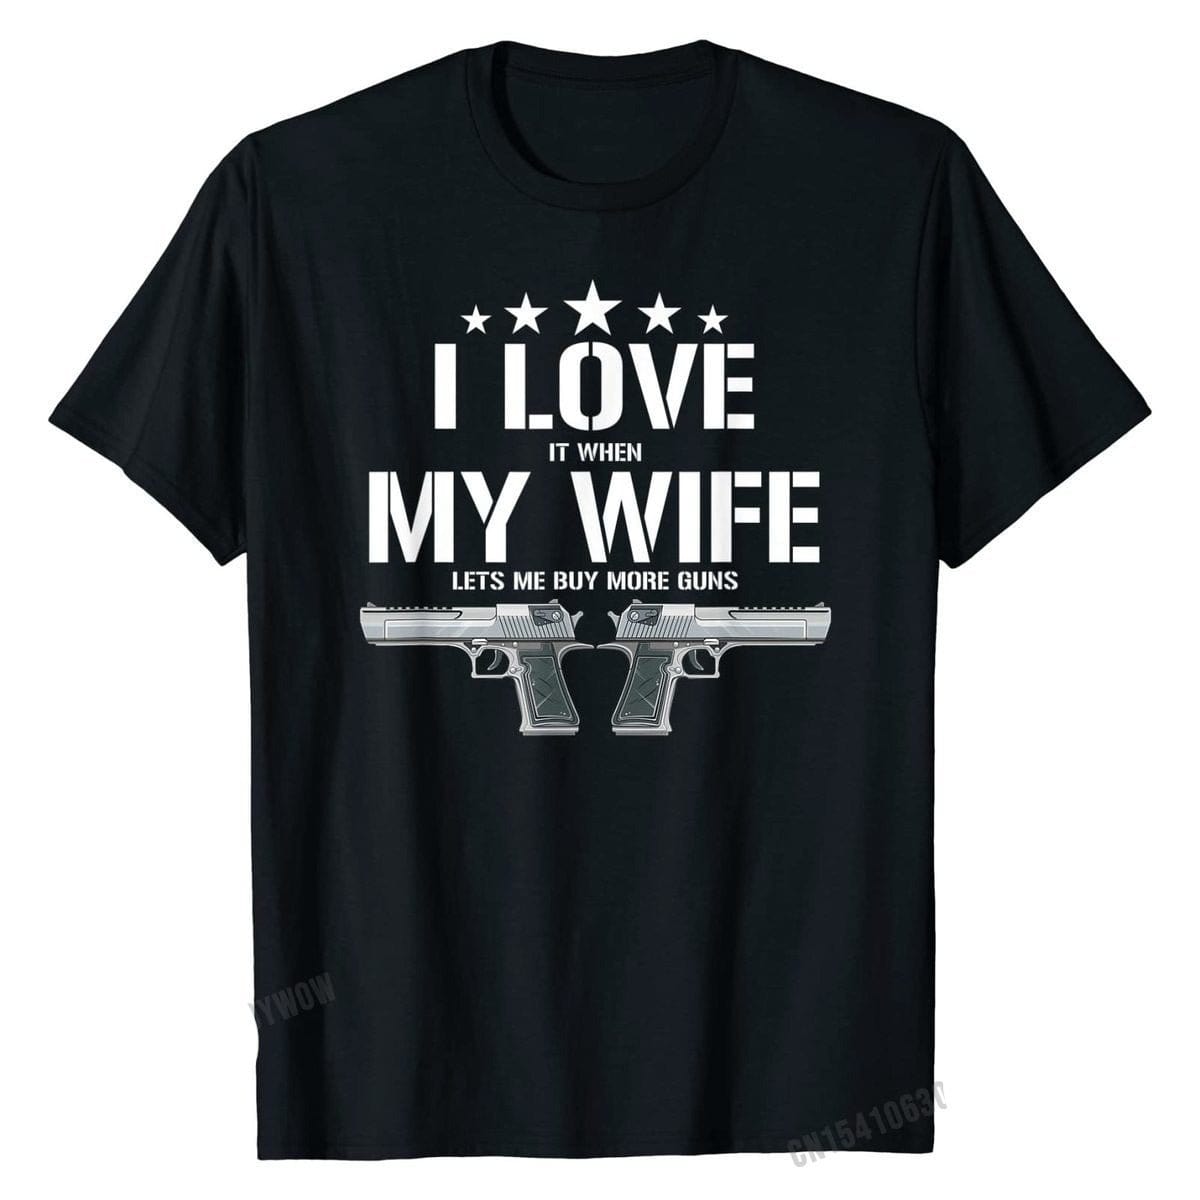 ACTION AIRSOFT 0 T-shirt "I love my wife"